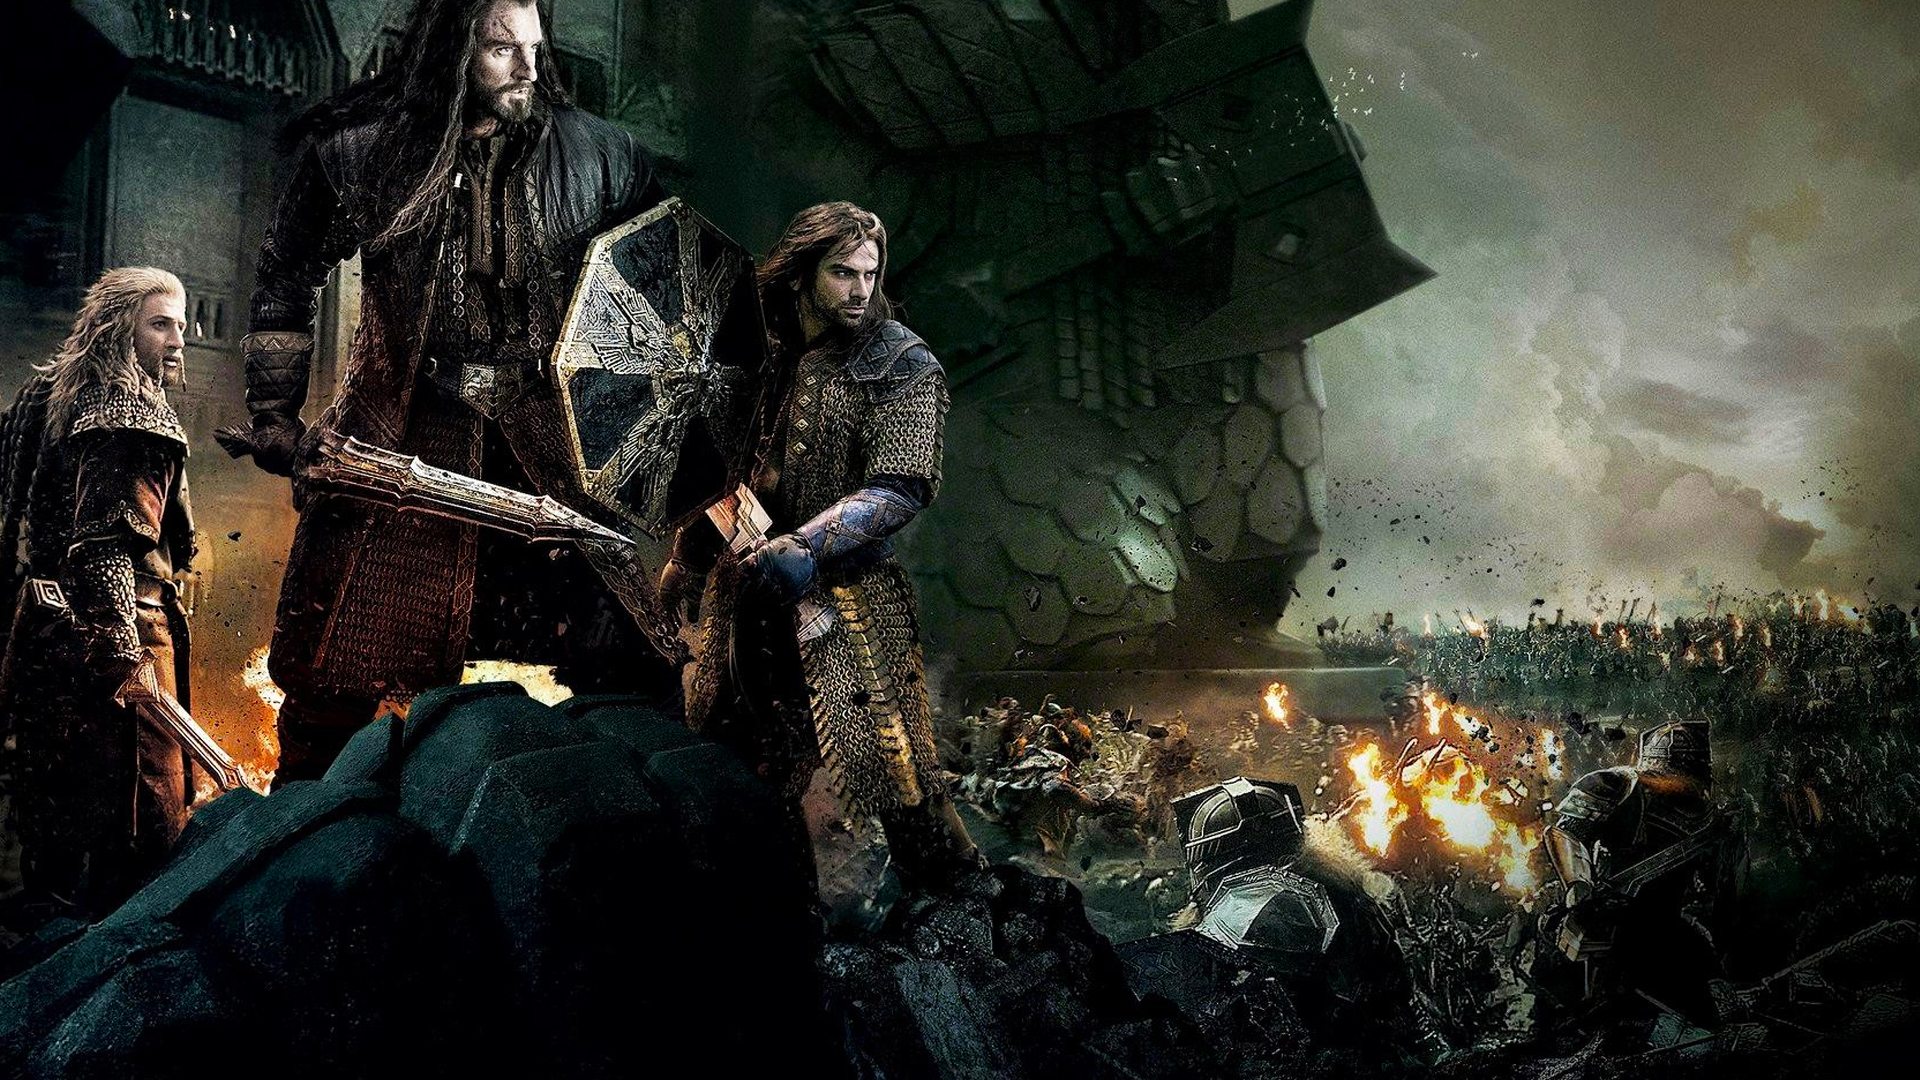 the hobbit the battle of the five armies wallpaper hd